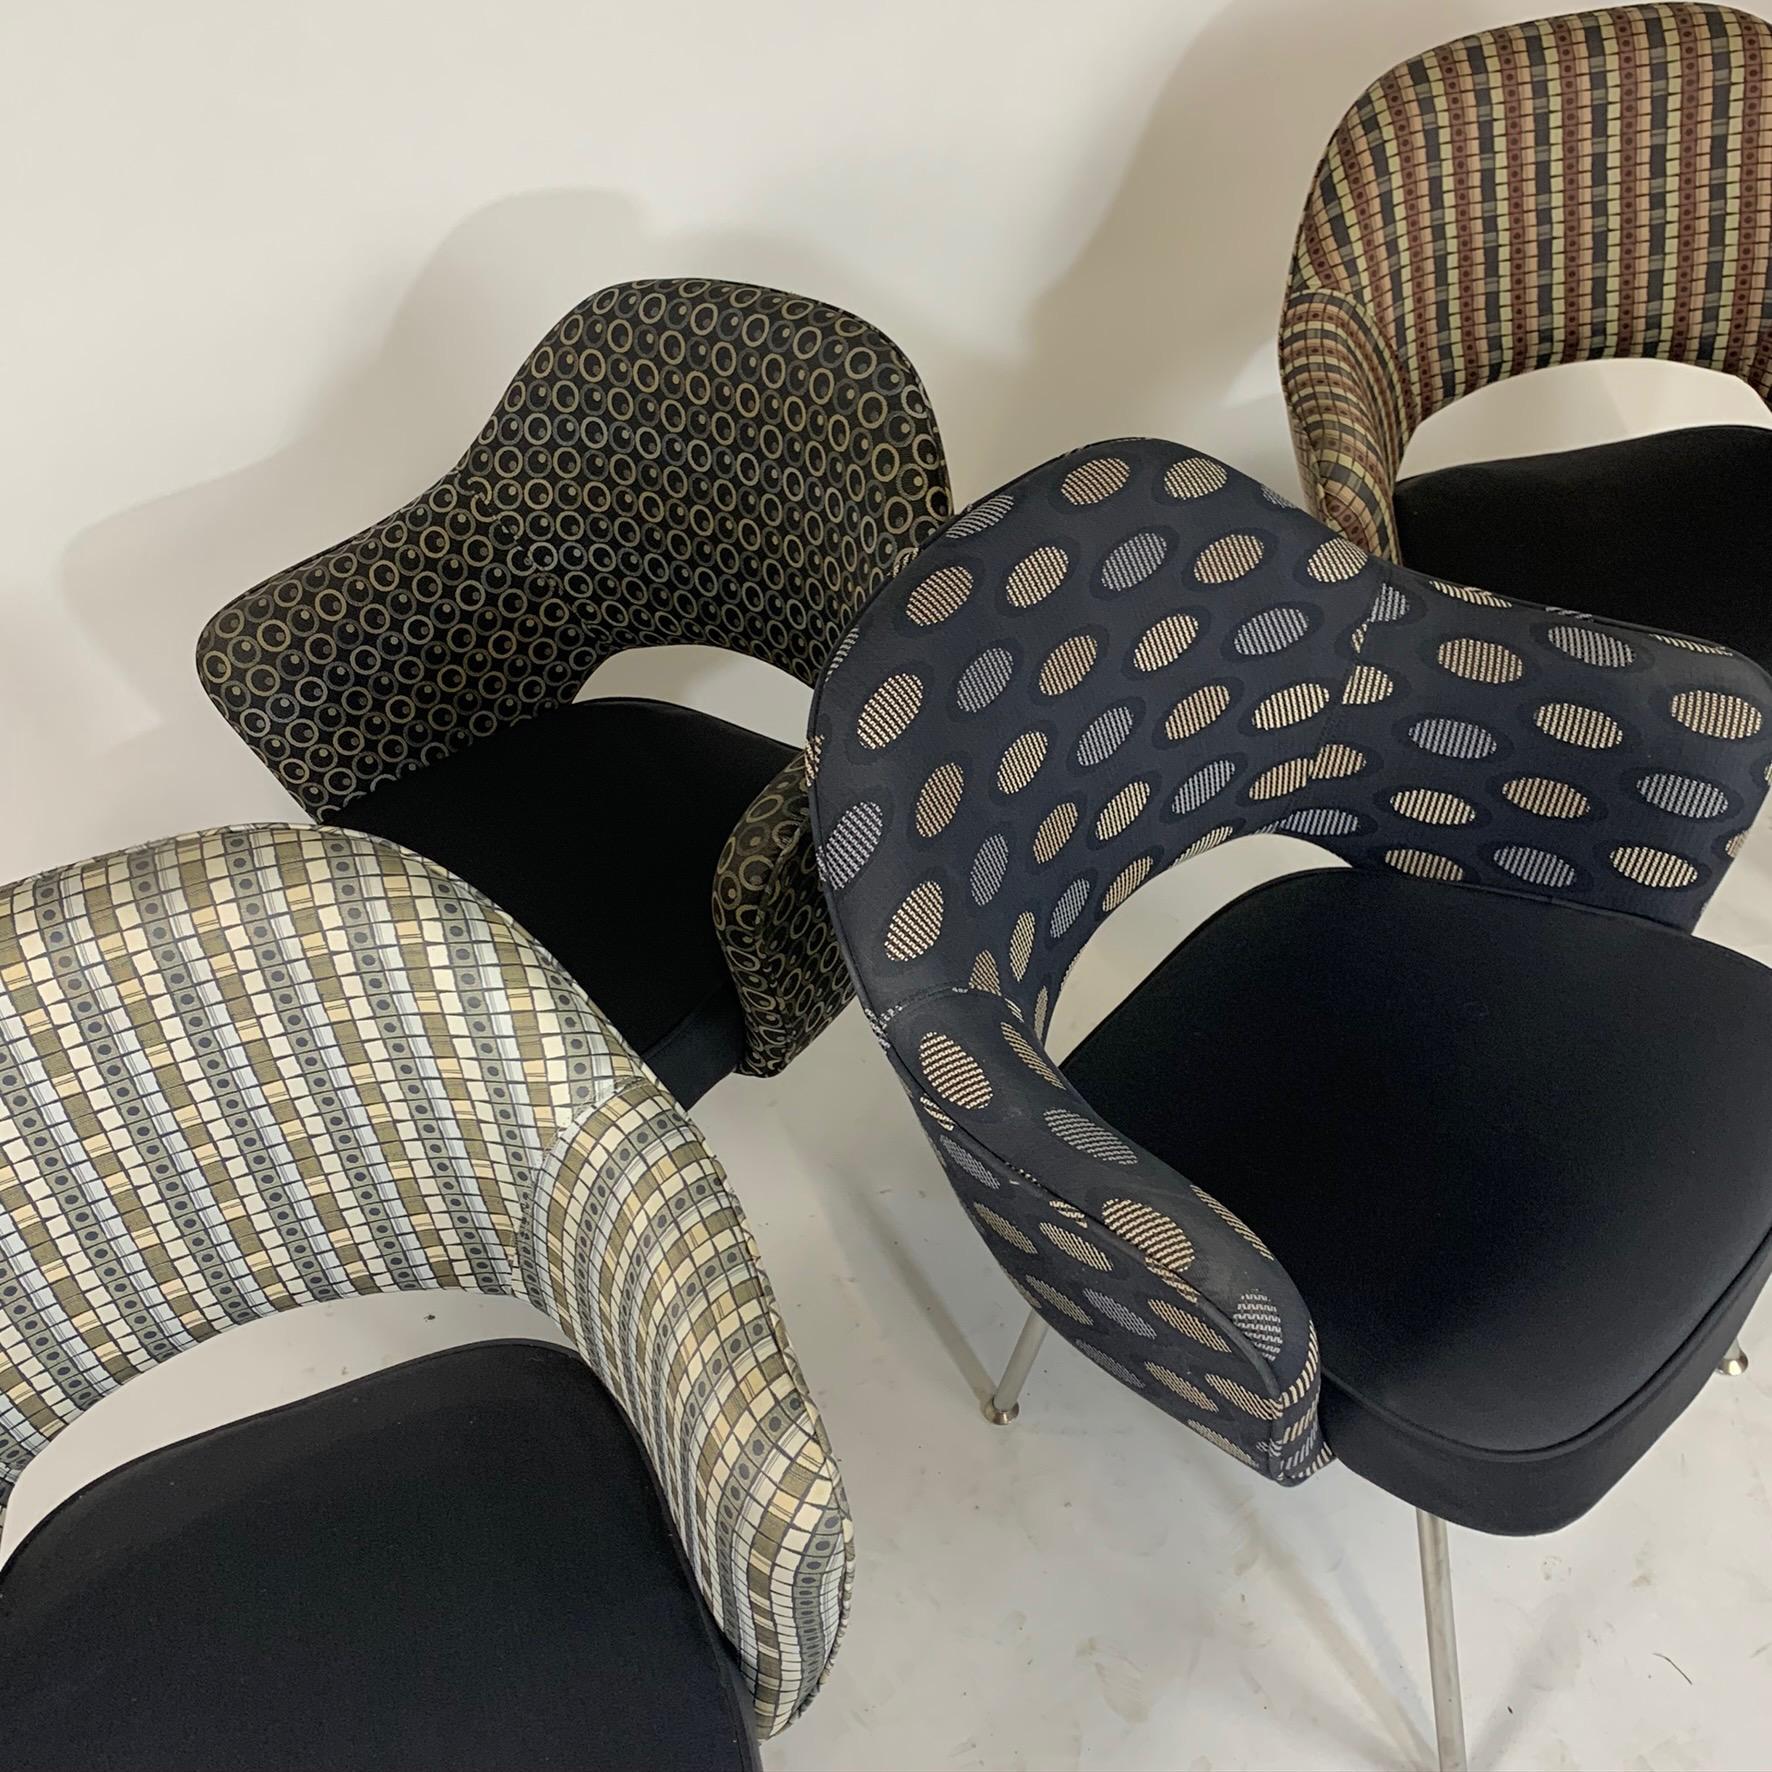 Executive armchairs designed by Eero Saarinen and manufactured by Knoll. Good and usable chairs in very good condition, most with labels. Of a more recent production year- mostly, 2004. All have original Knoll upholstery. Seats are a matte charcoal